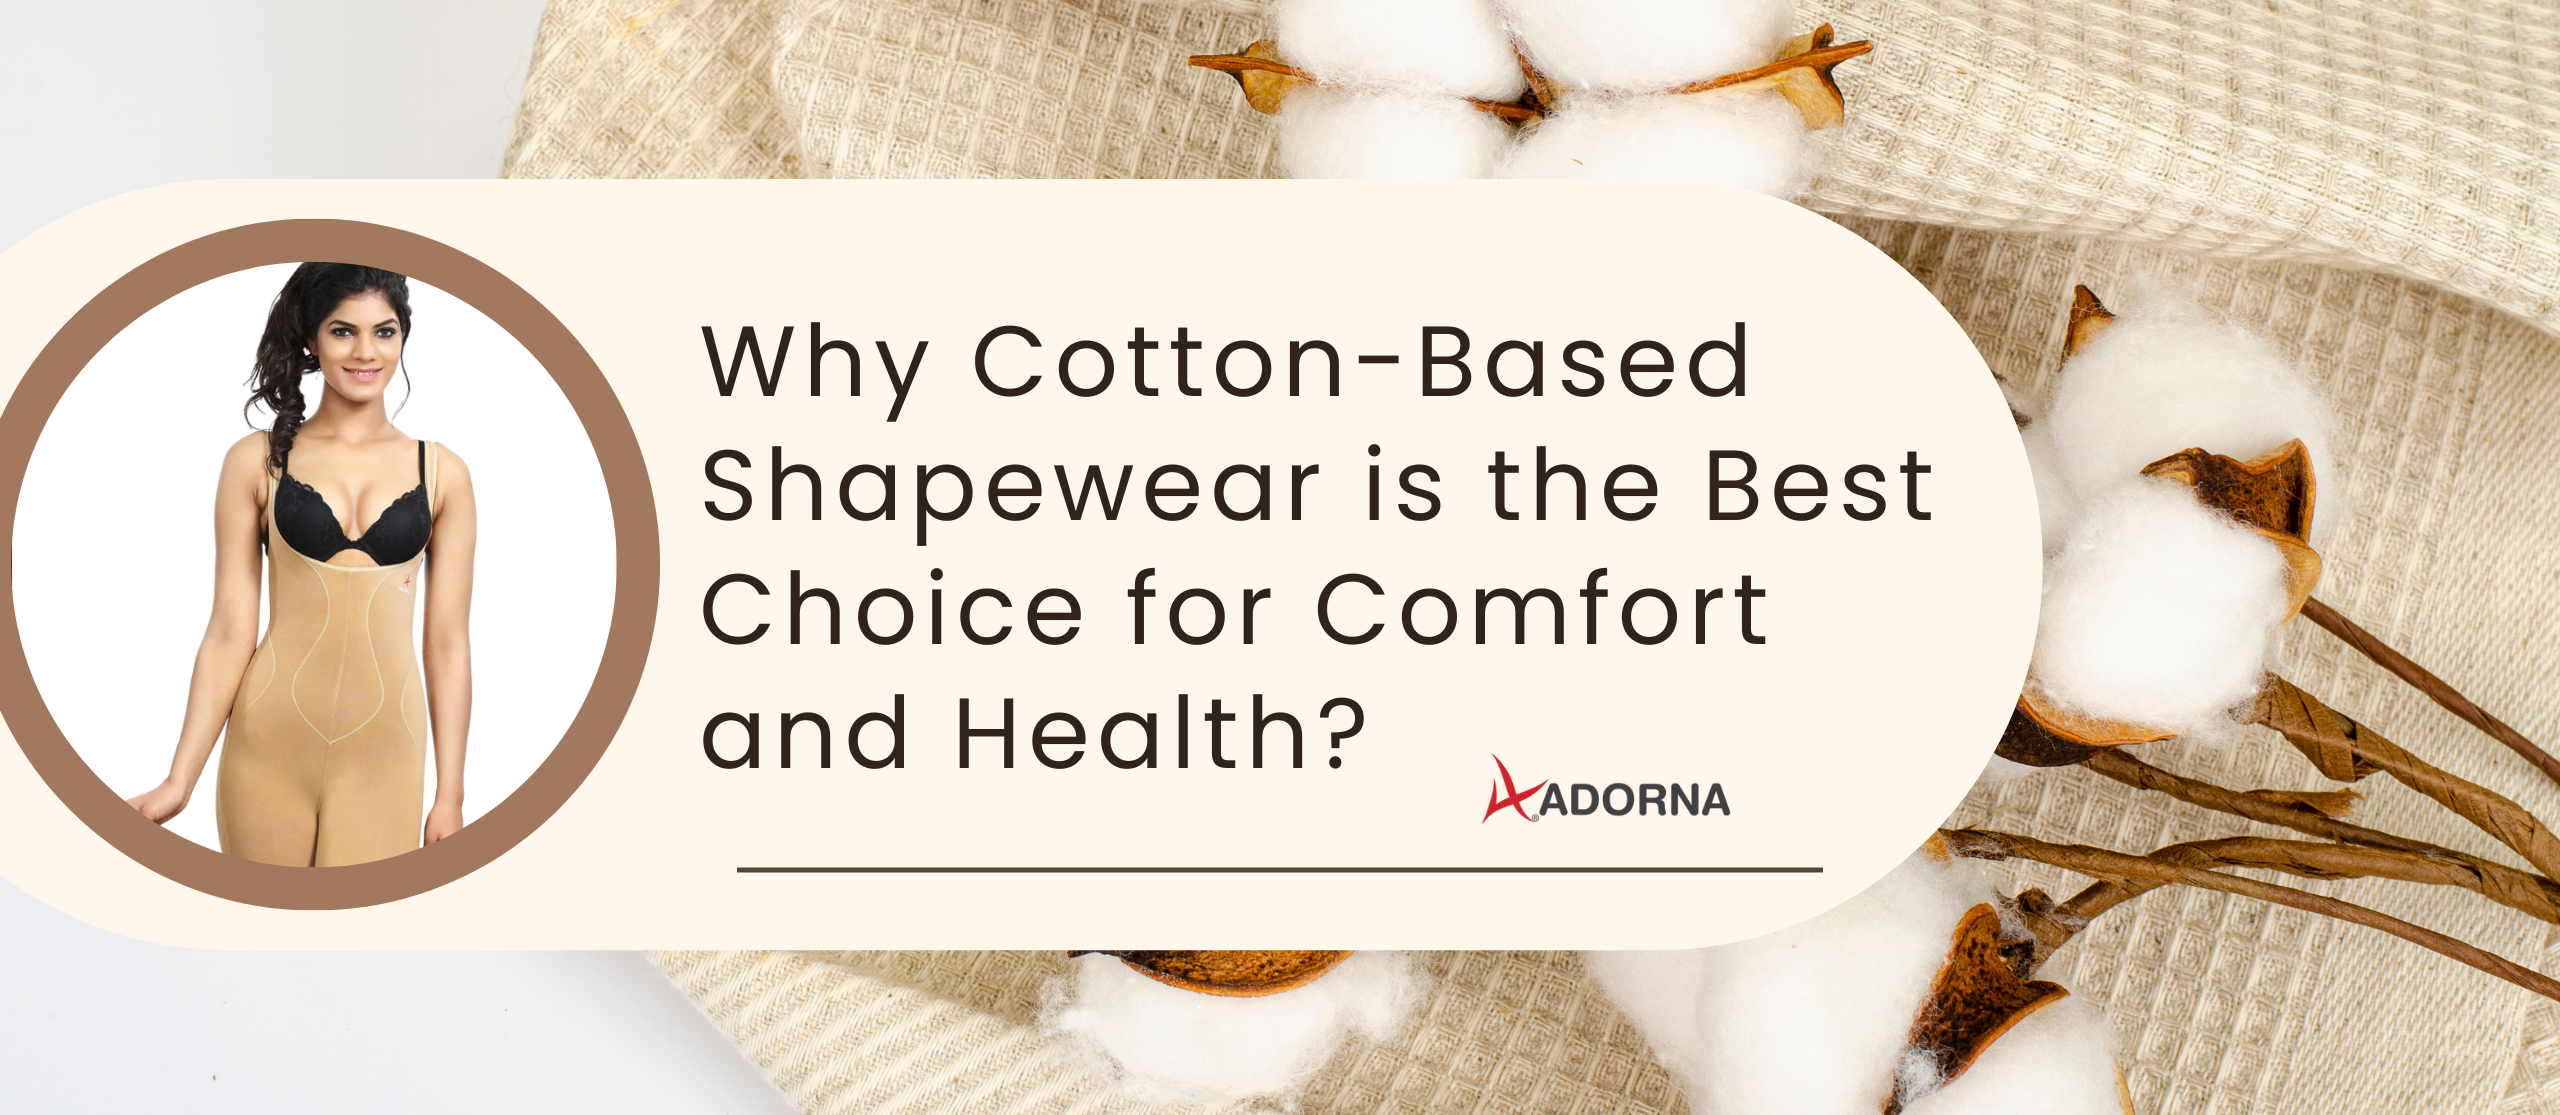 Why Cotton-Based Shapewear is the Best Choice for Comfort and Health –  Adorna